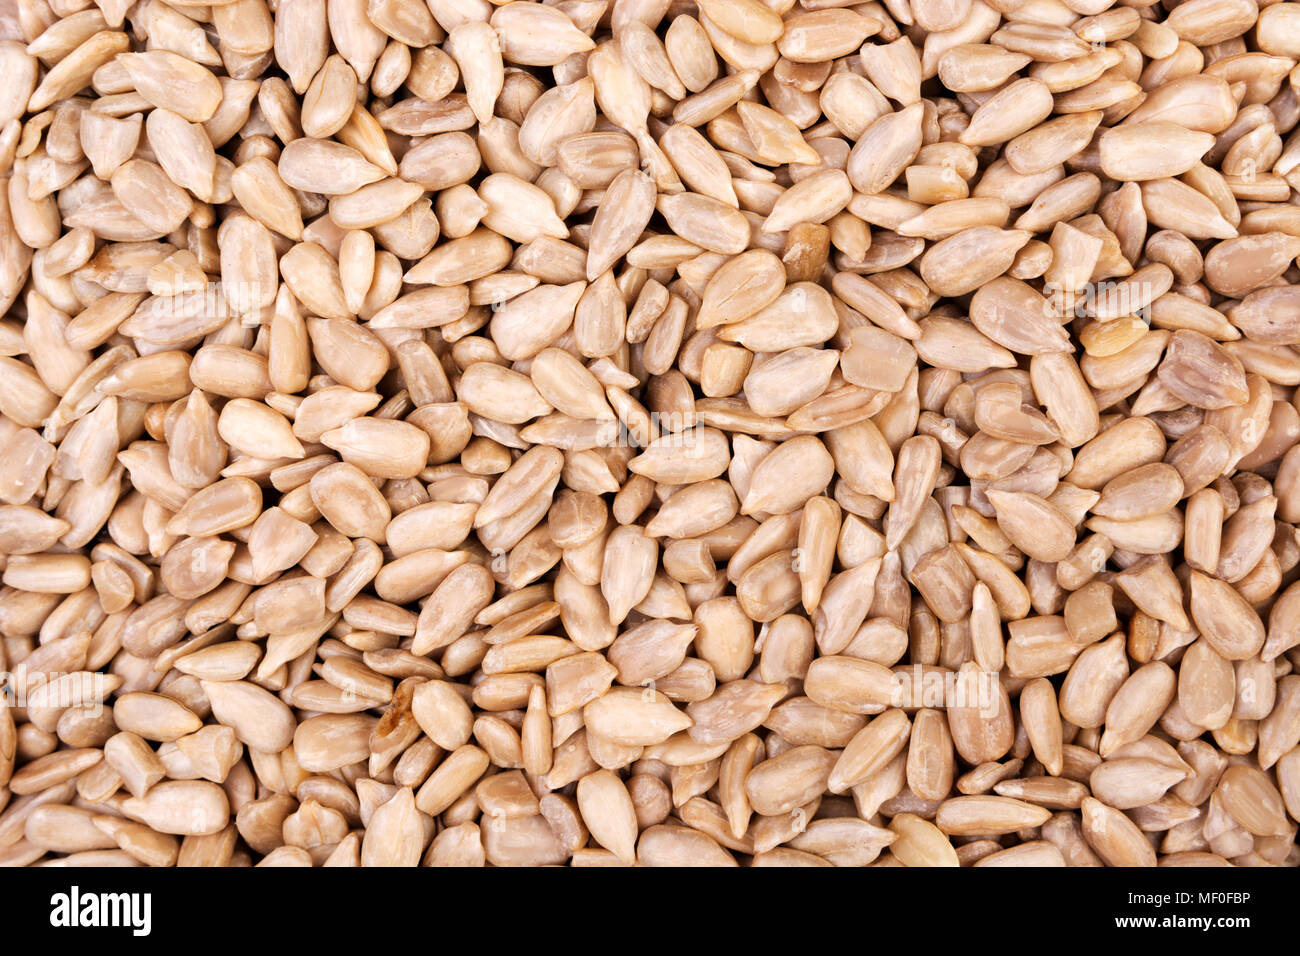 Peeled sunflower seeds background. View from above Stock Photo